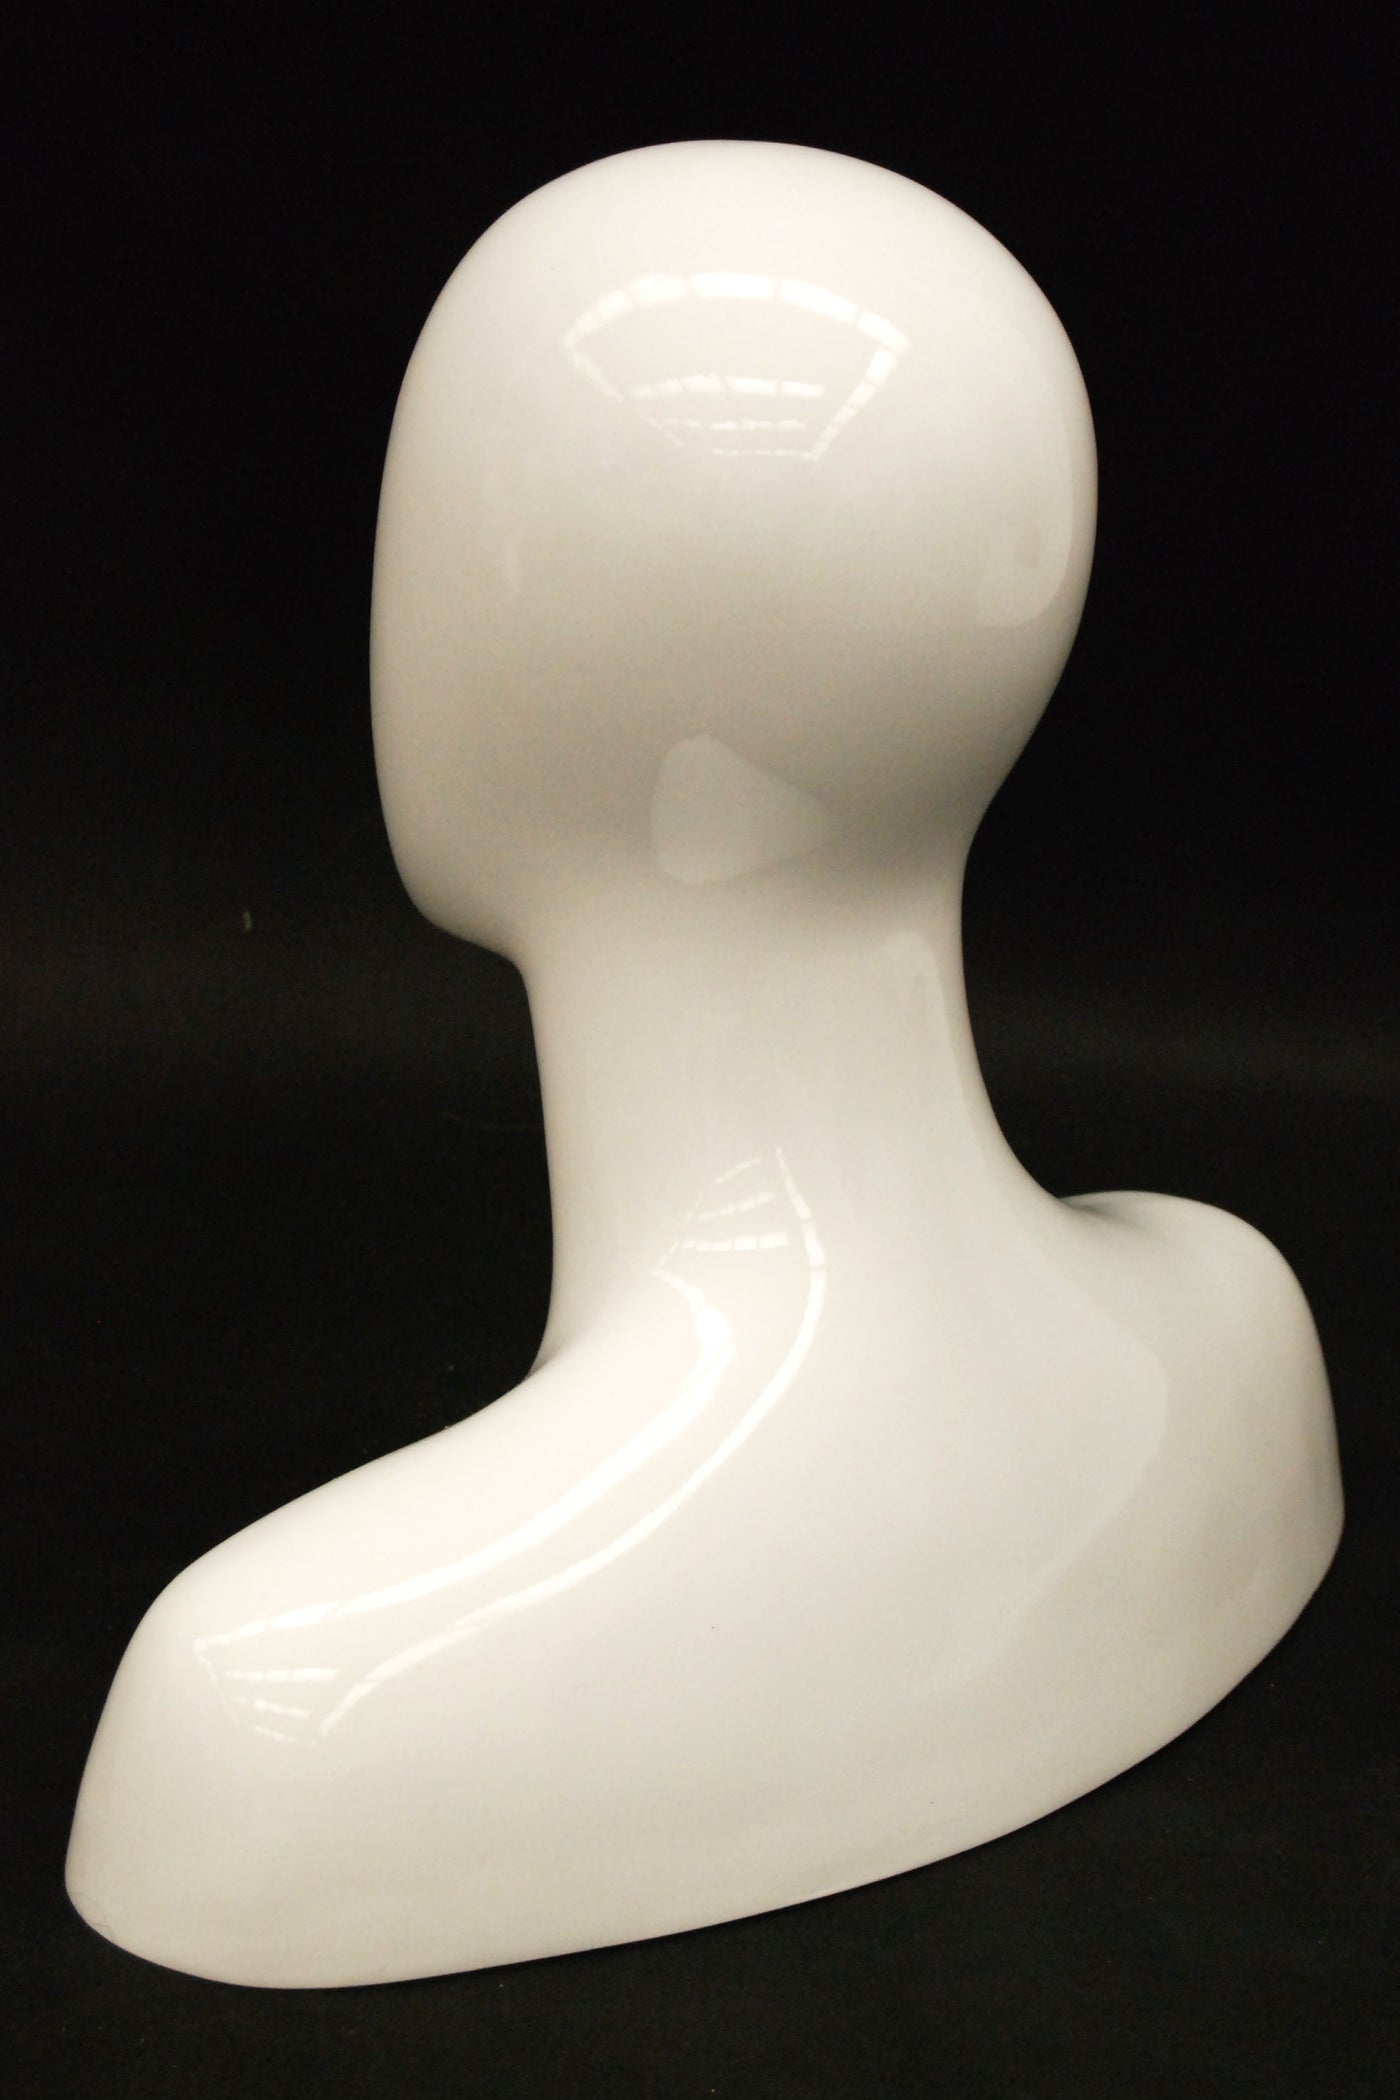 Male Mannequin Head with Round Shoulder: White – Mannequin Madness